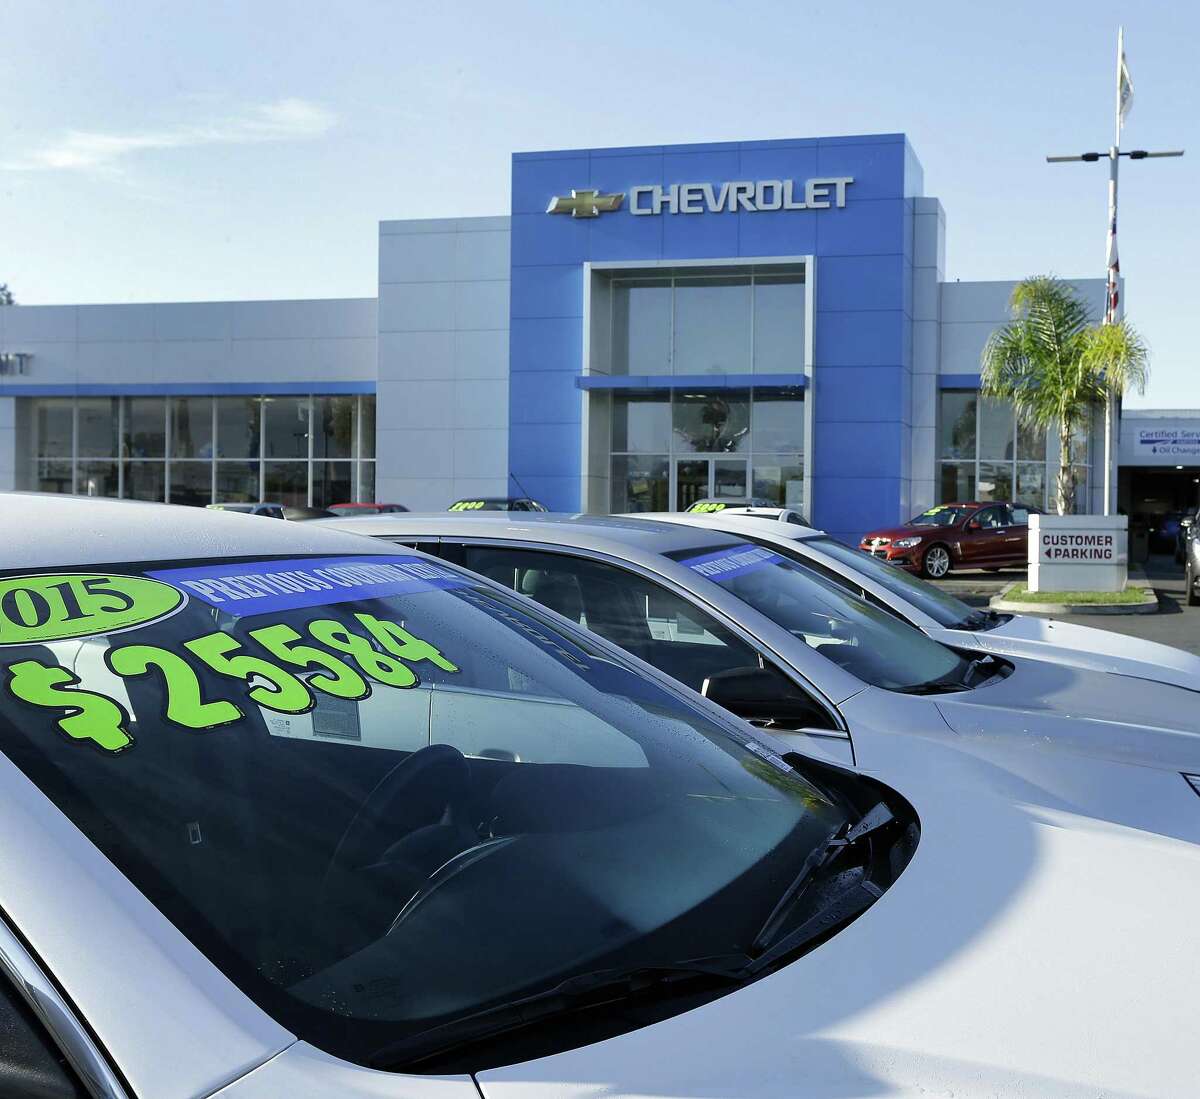 Lowering credit standards a bit and stretching repayment windows up to six or seven years has helped drive the auto business to record levels, with 17.55 million vehicle sales in all last year.